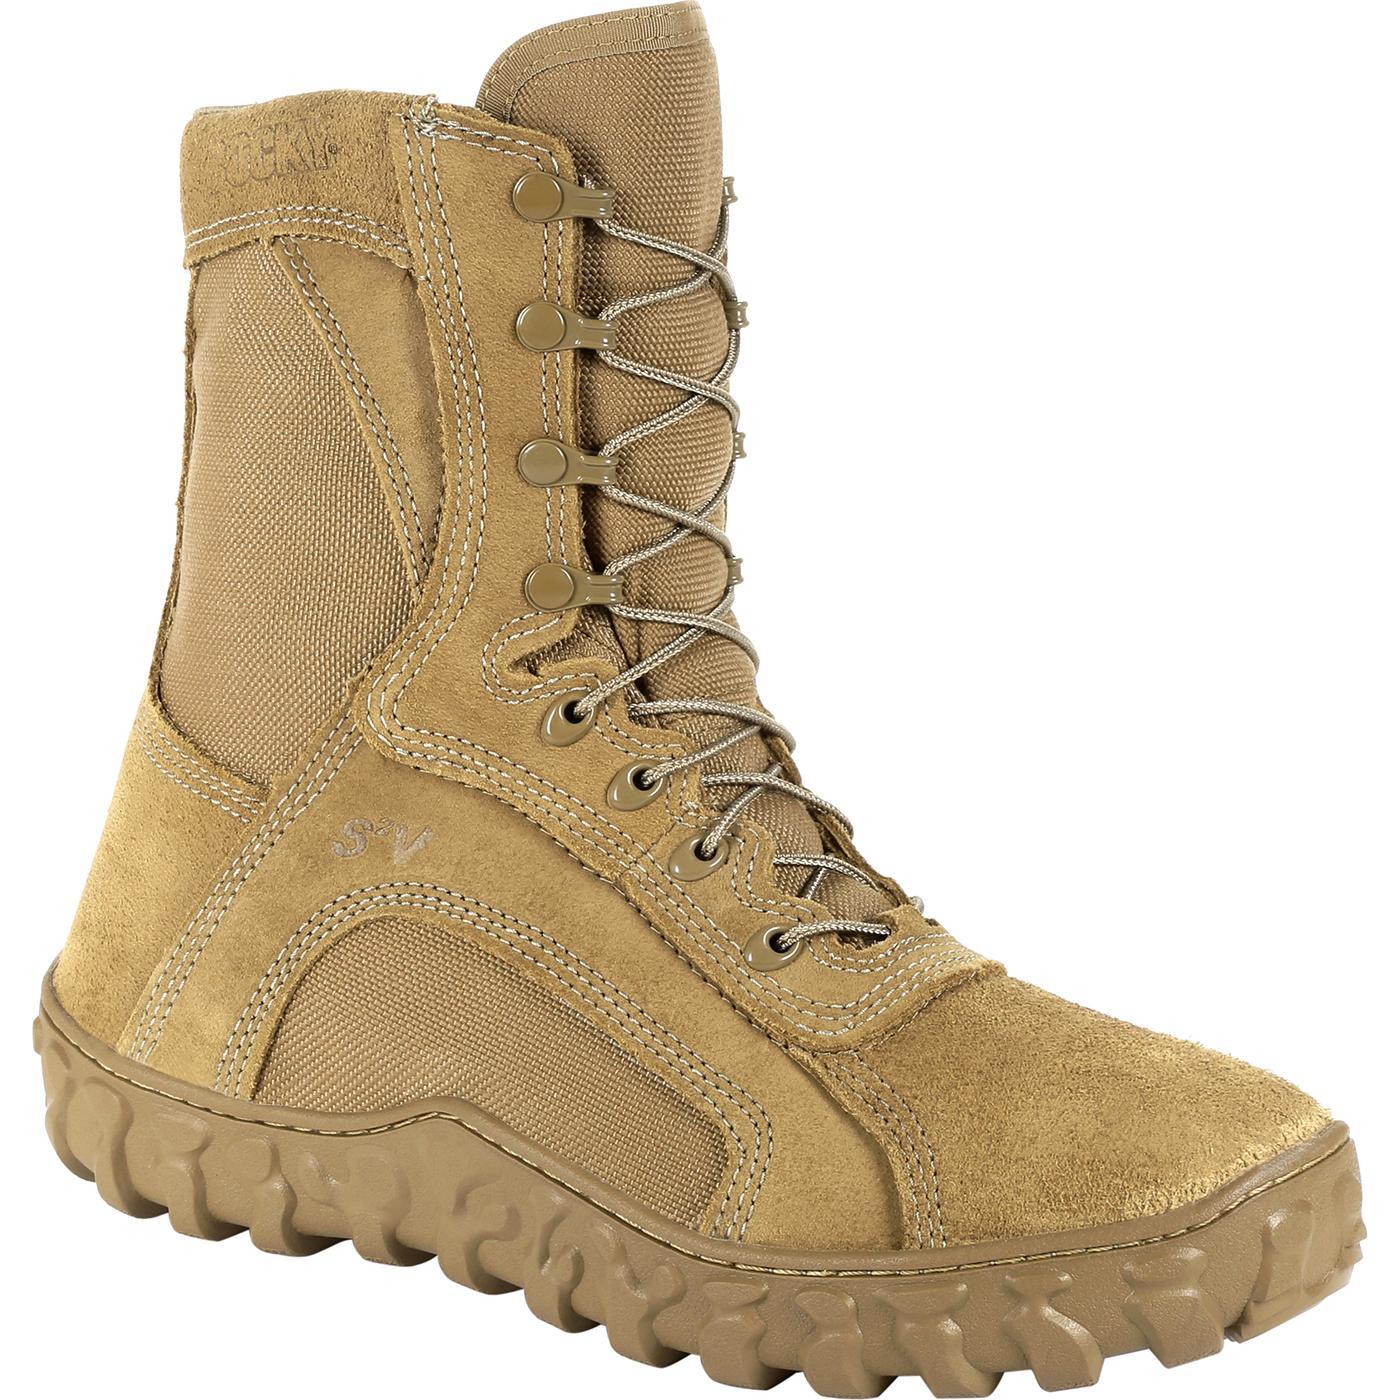 Rocky S2V Waterproof 400G Insulated Military Boot - Flyclothing LLC